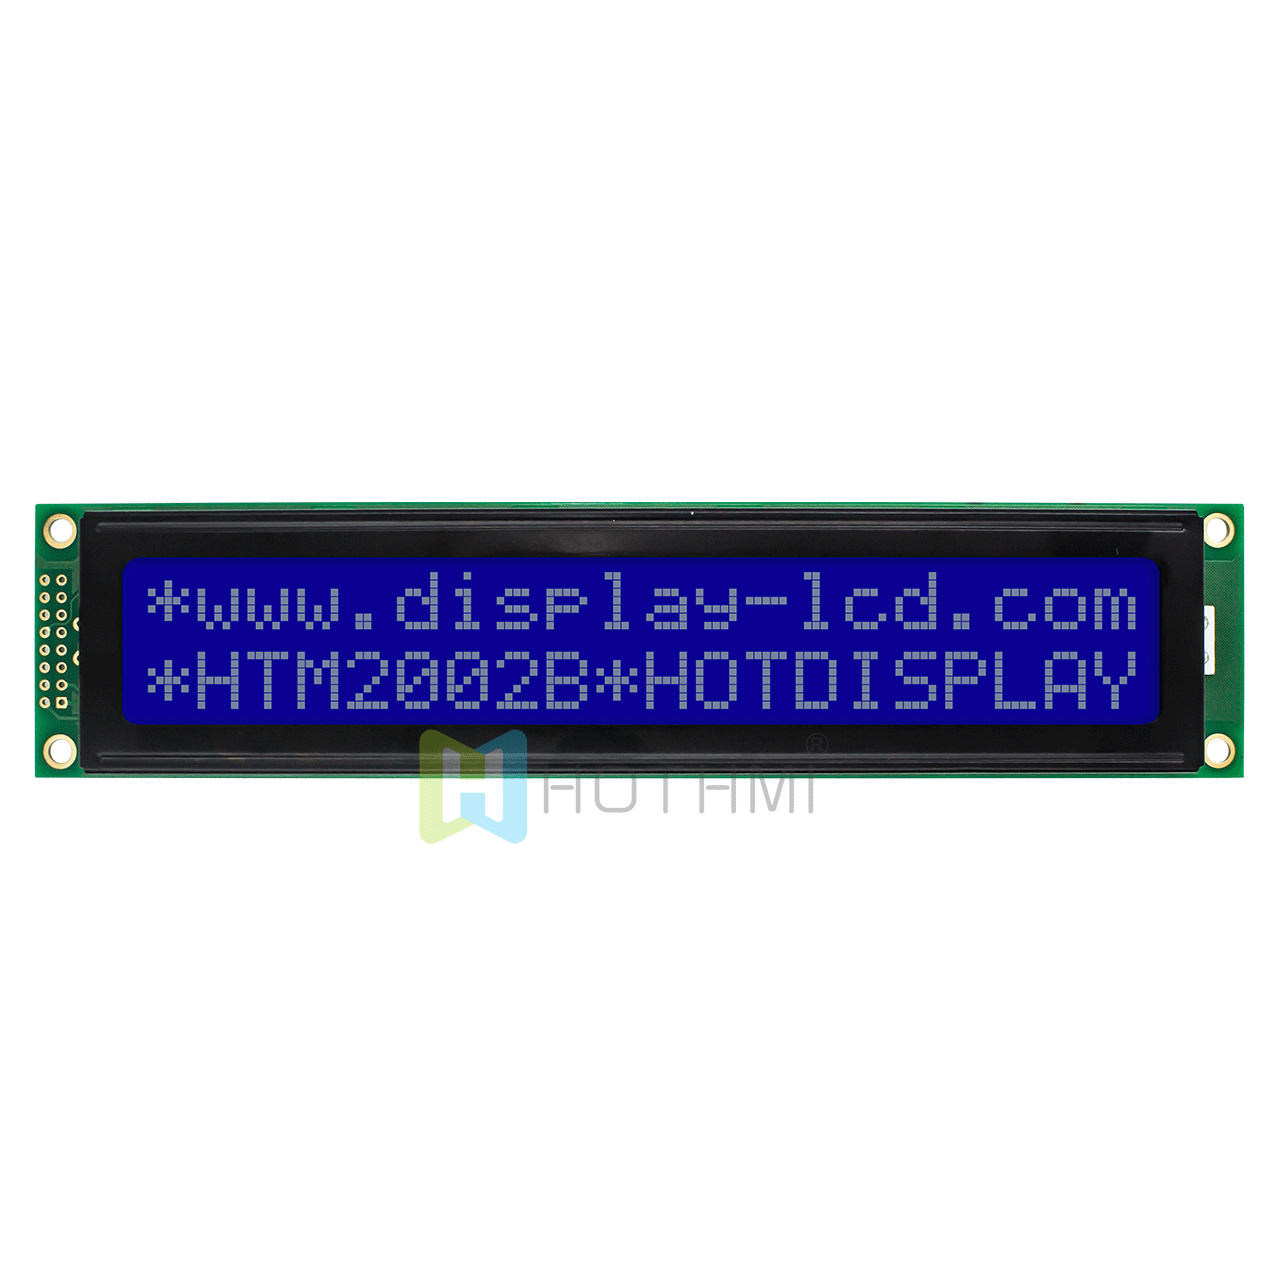 Arduino-20X2 character monochrome LCD module/STN blue negative display/white backlight/white text on blue background/5.0V/ST7066U control